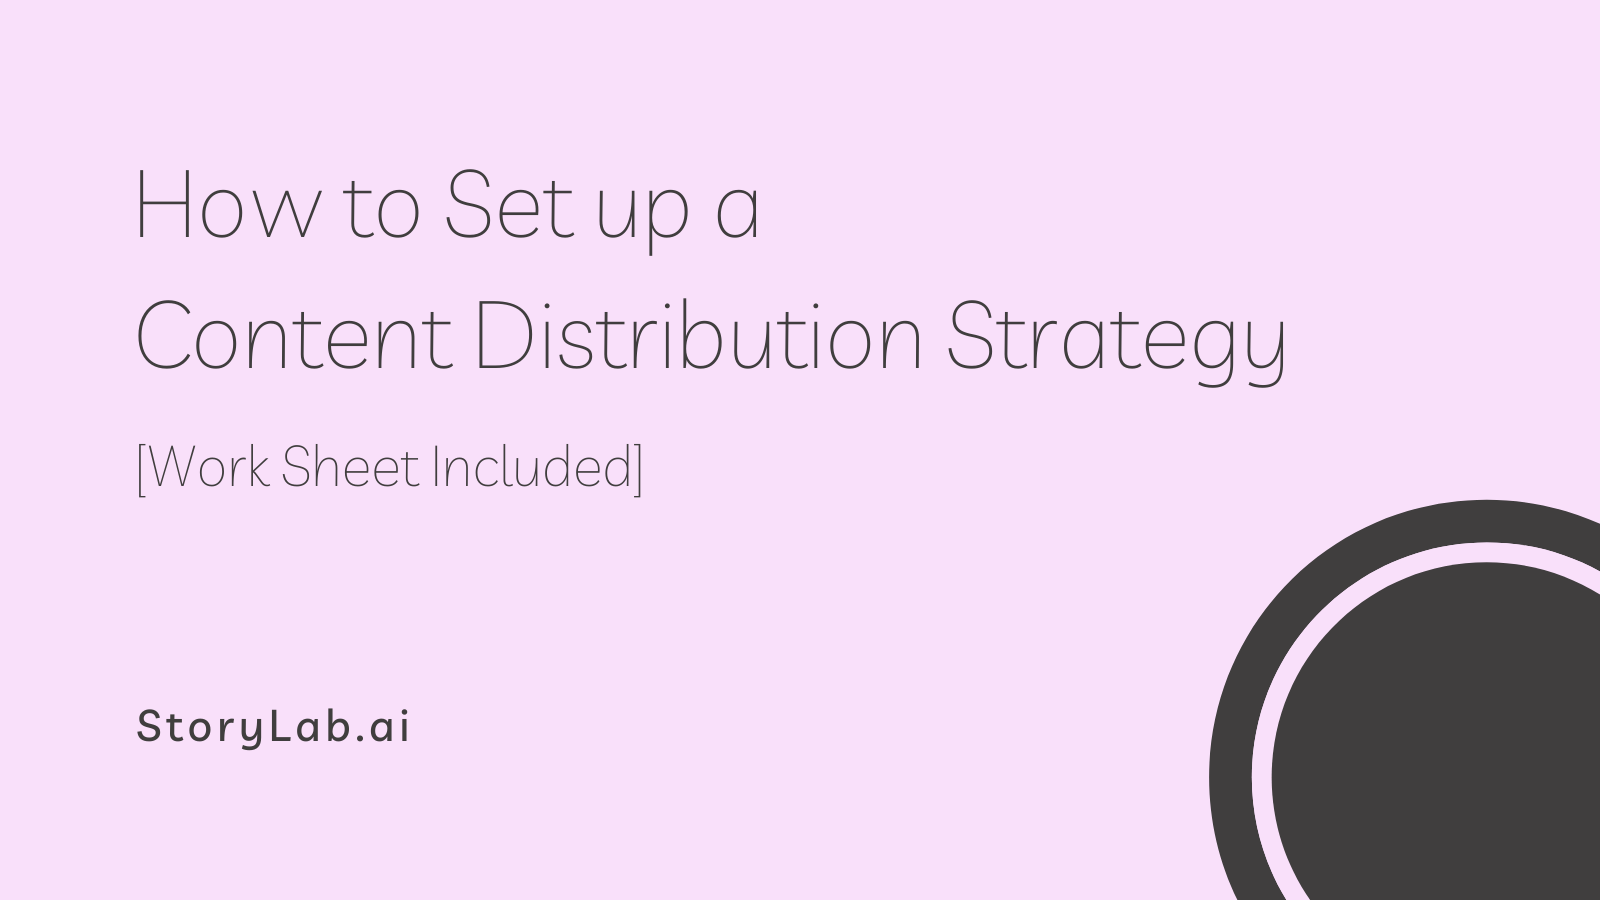 How to Set up a Content Distribution Strategy